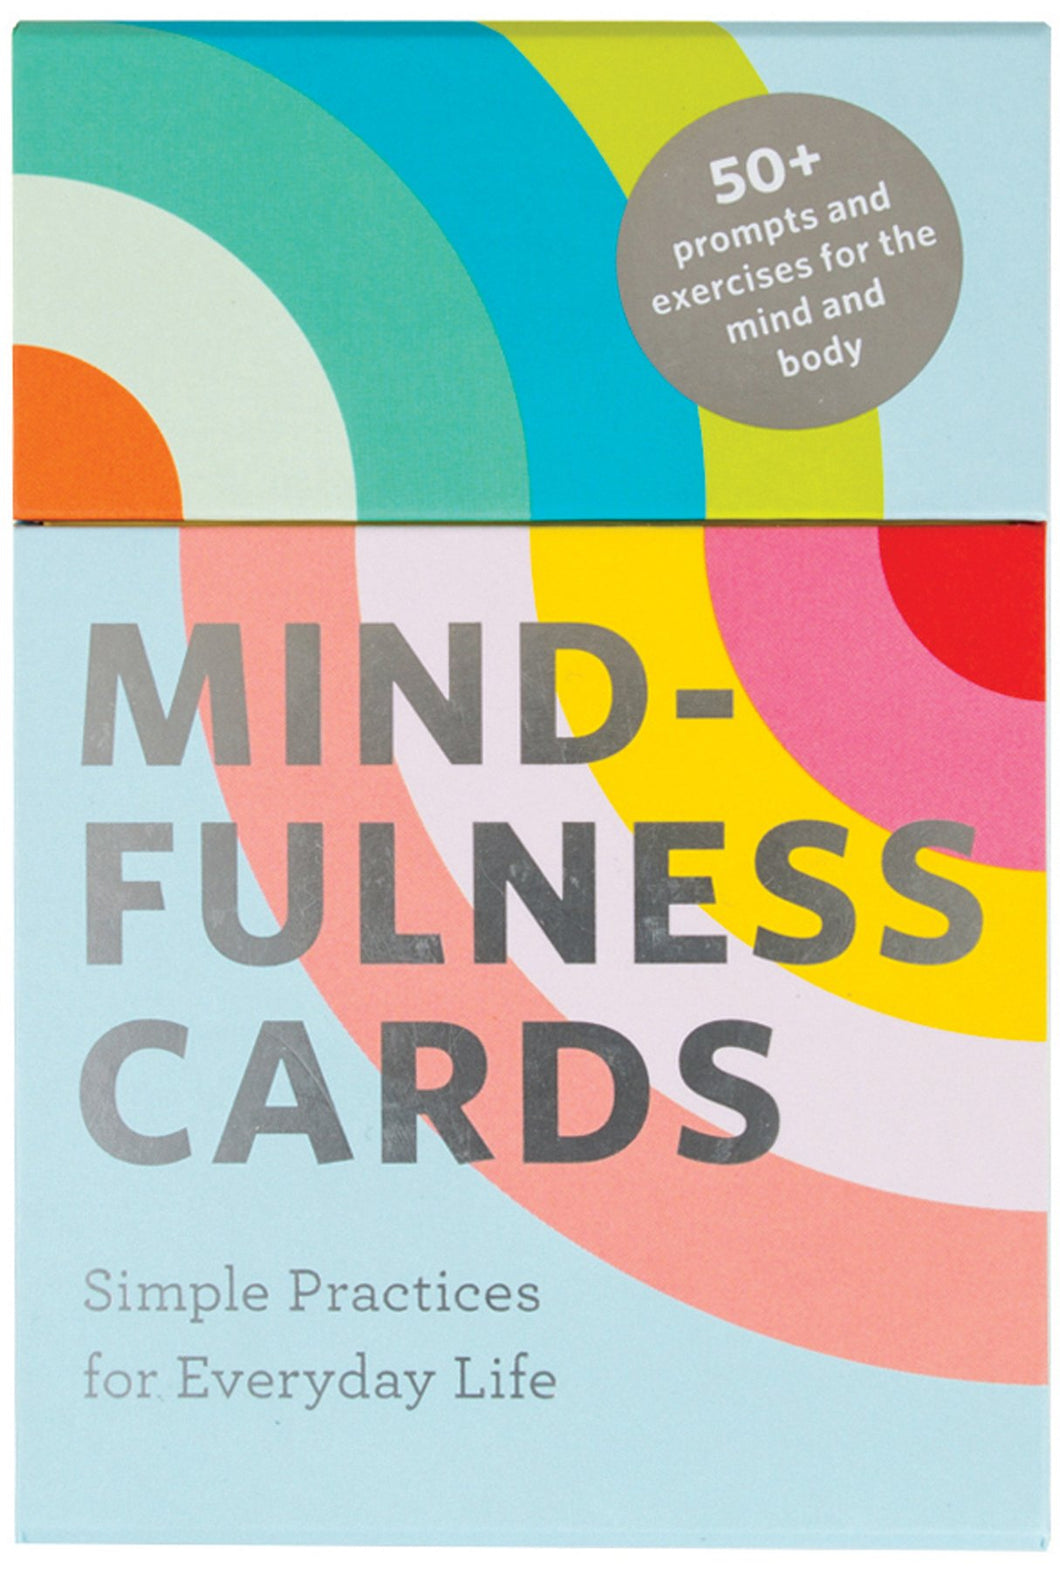 Mindfulness Cards: Simple Practices for Everyday Life [Rohan Gunatillake]